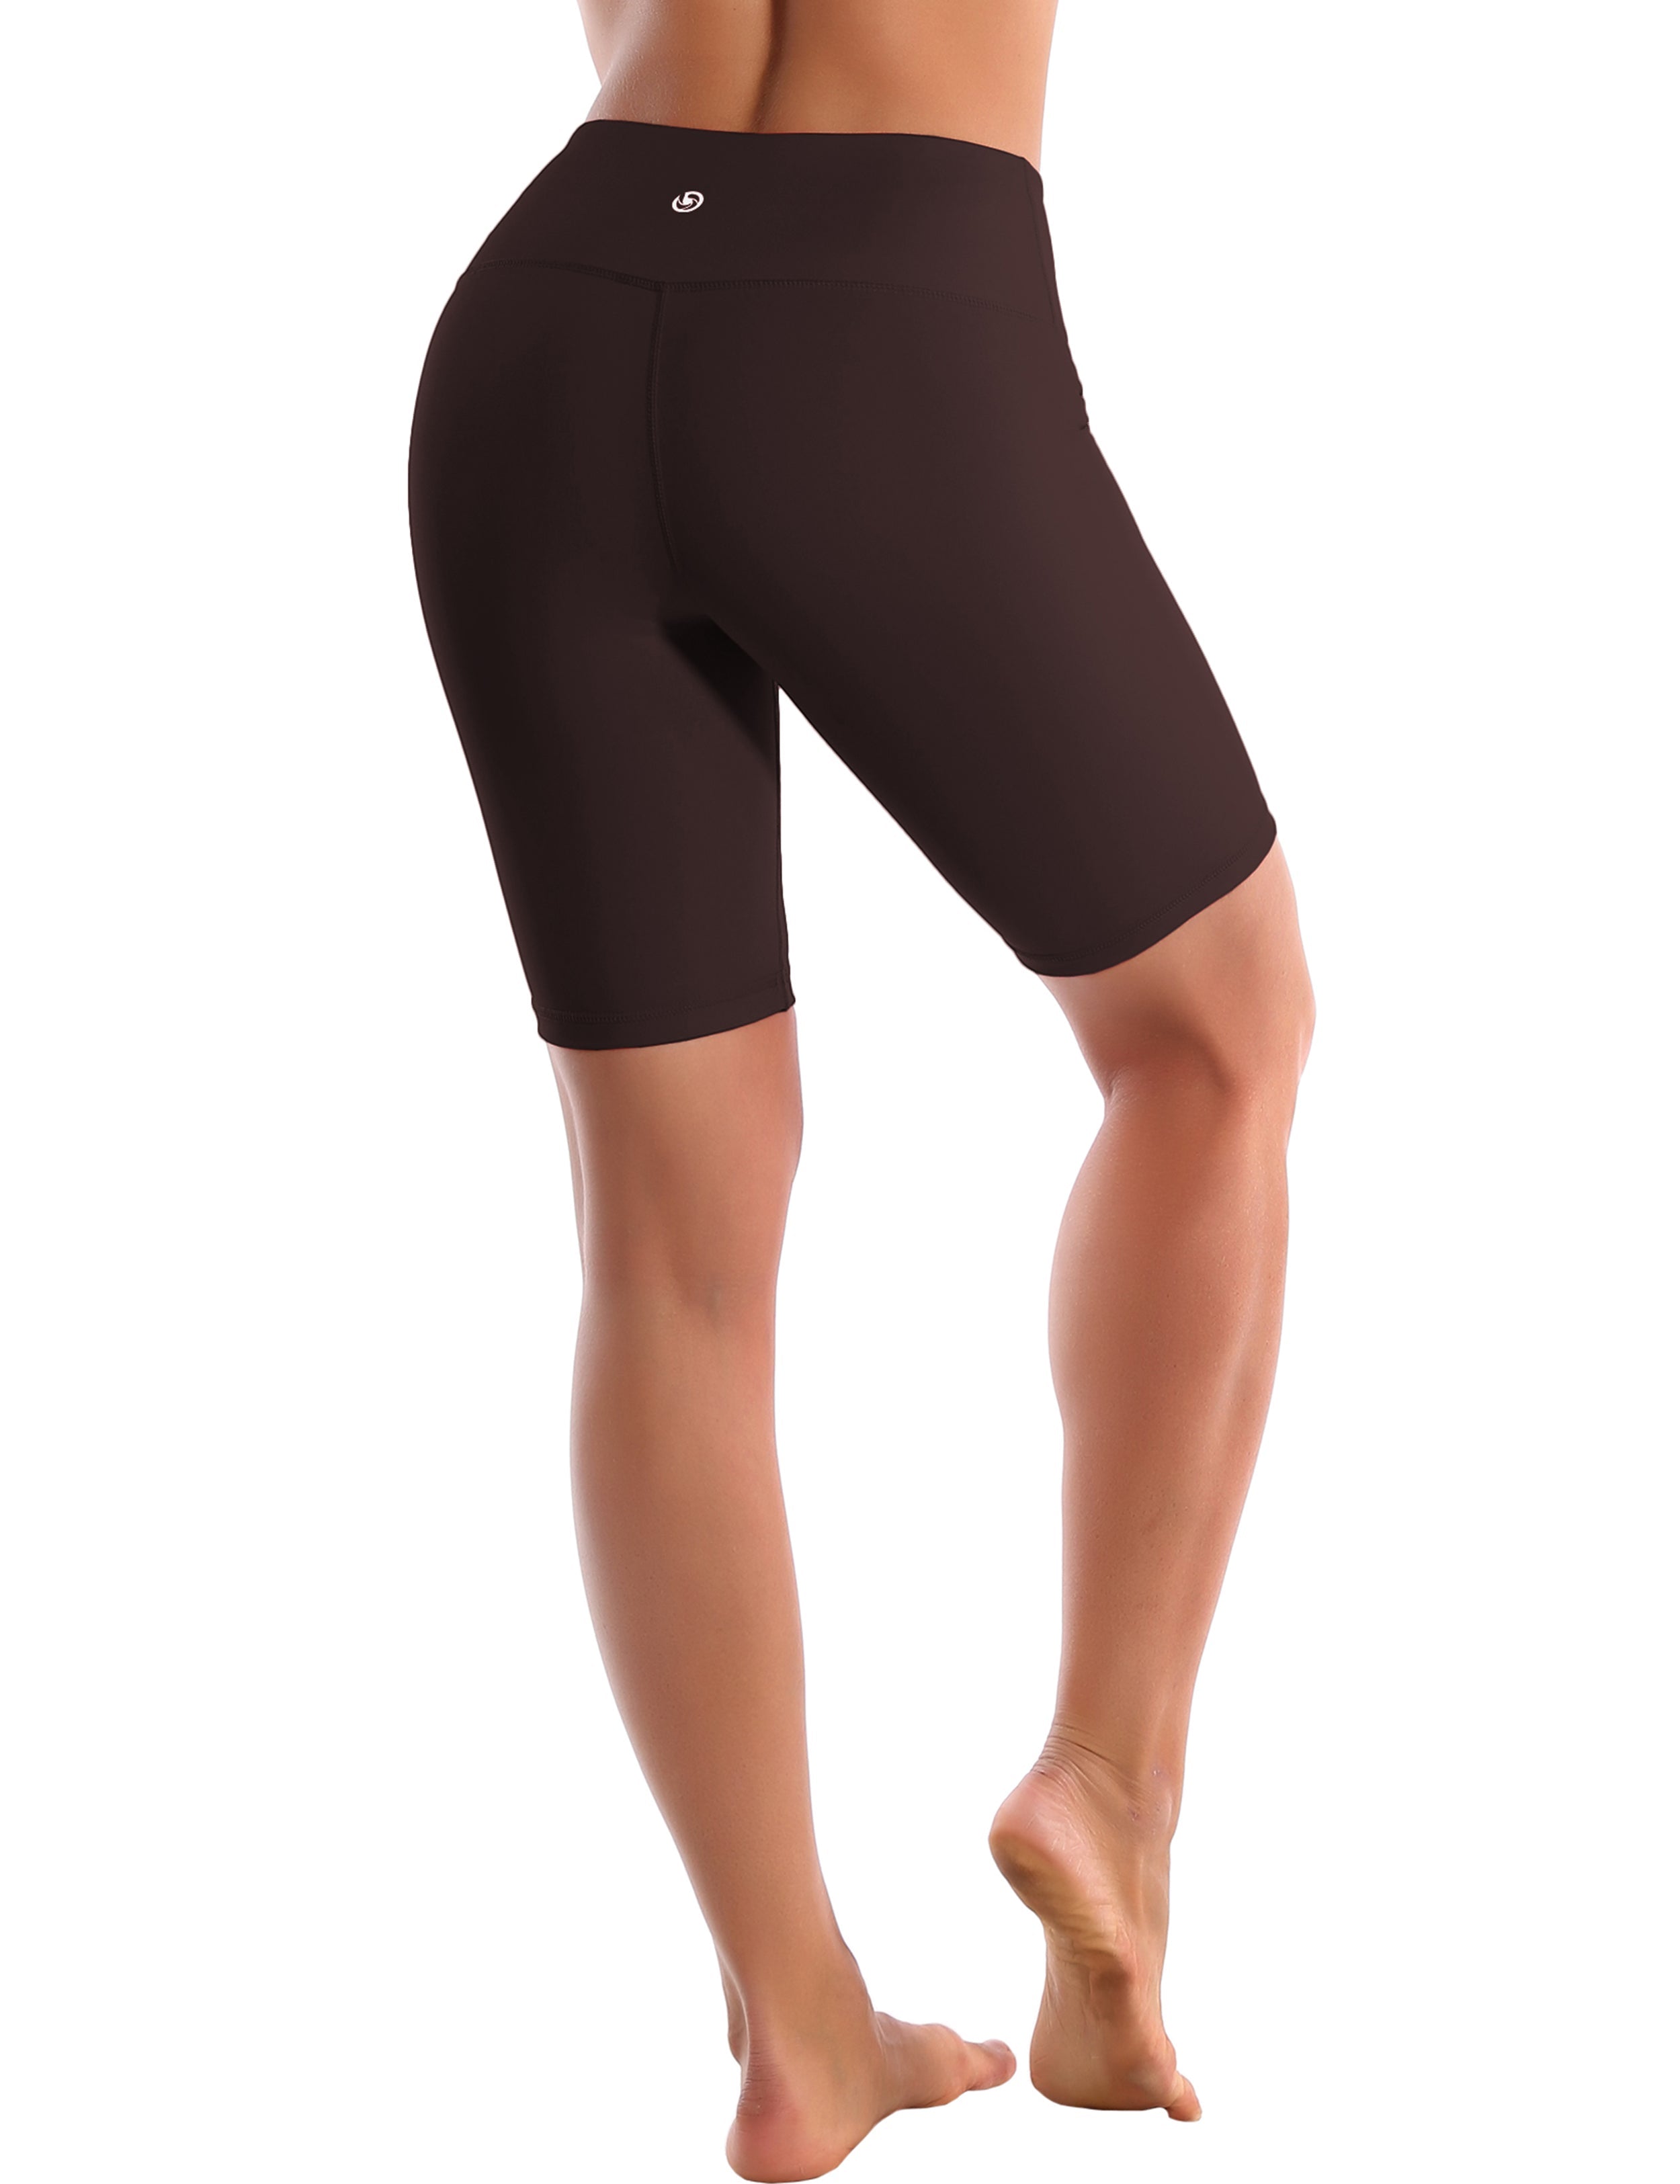 8" High Waist Jogging Shorts mahoganymaroon Sleek, soft, smooth and totally comfortable: our newest style is here. Softest-ever fabric High elasticity High density 4-way stretch Fabric doesn't attract lint easily No see-through Moisture-wicking Machine wash 75% Nylon, 25% Spandex